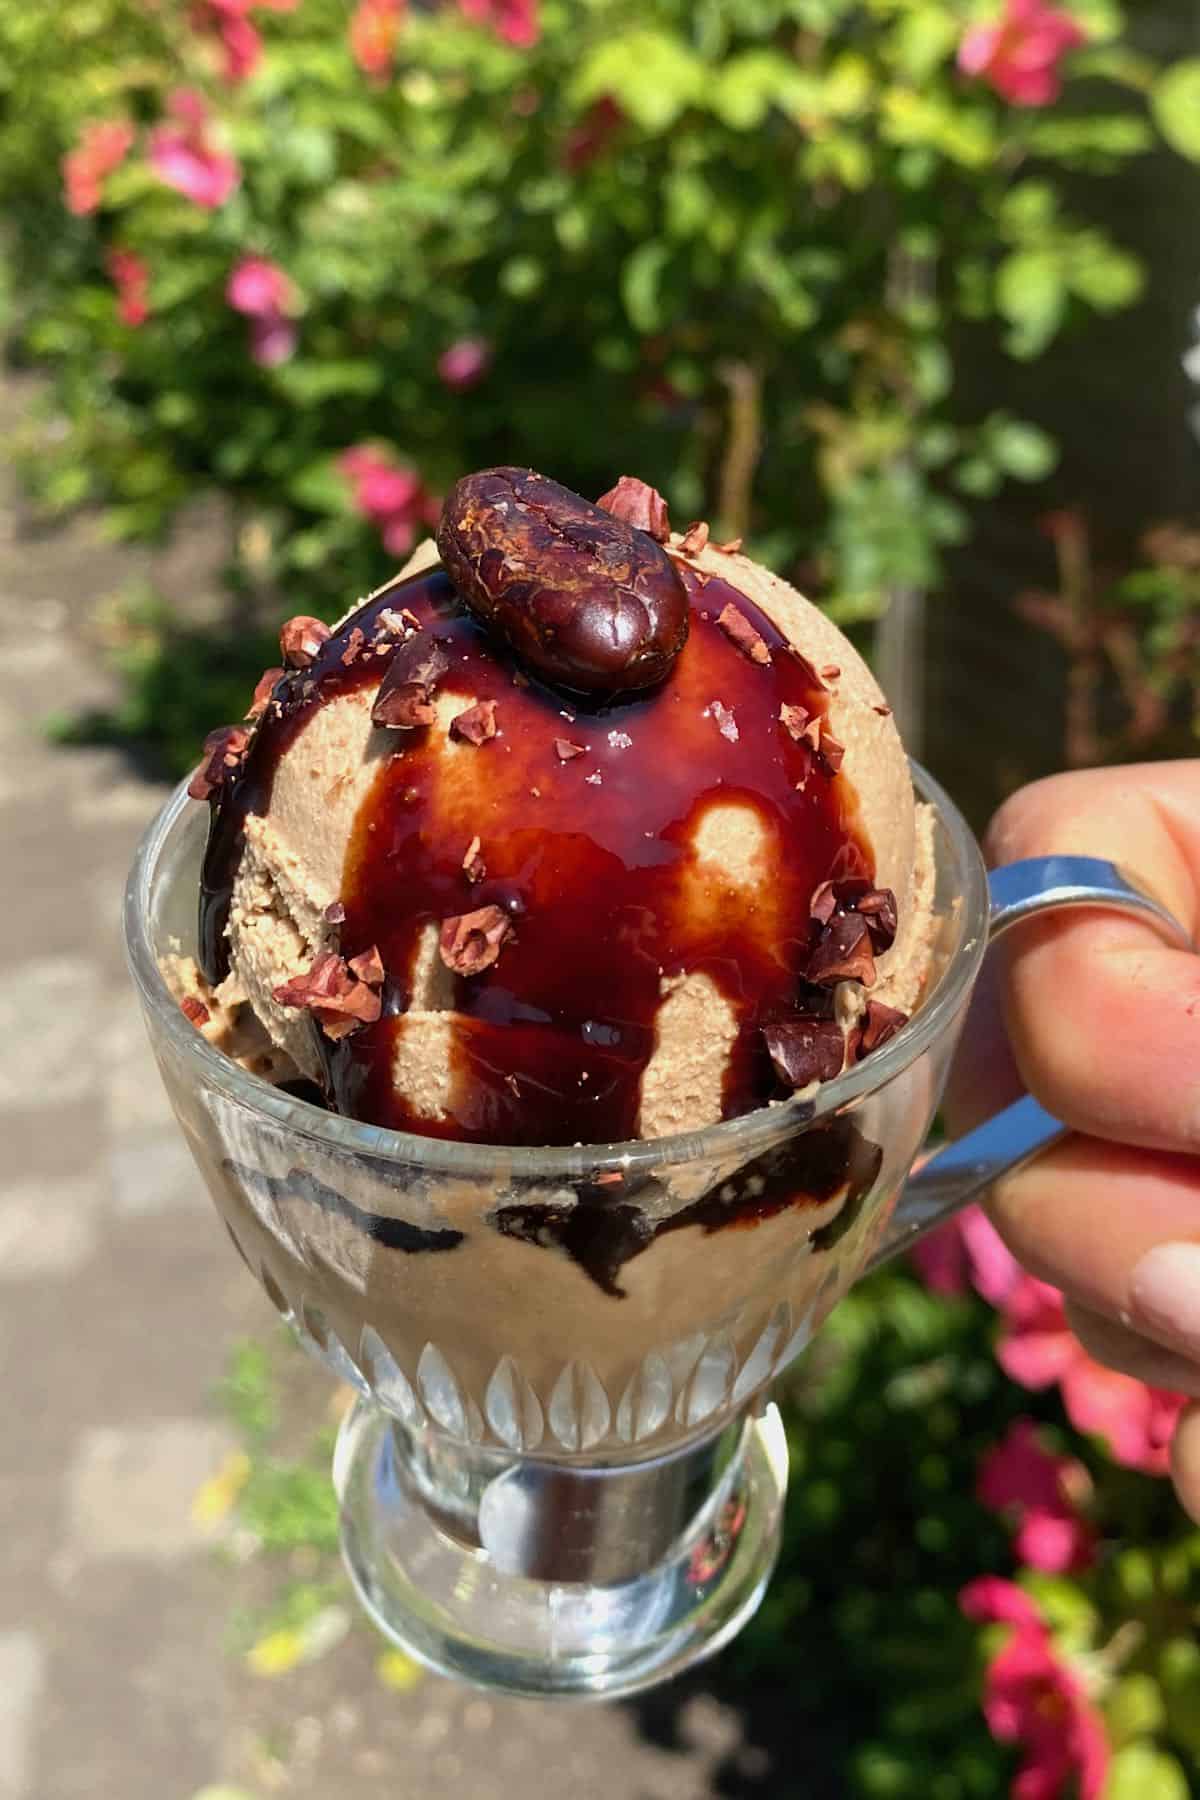 Coffee ice cream topped with syrup and toasted cacao nibs